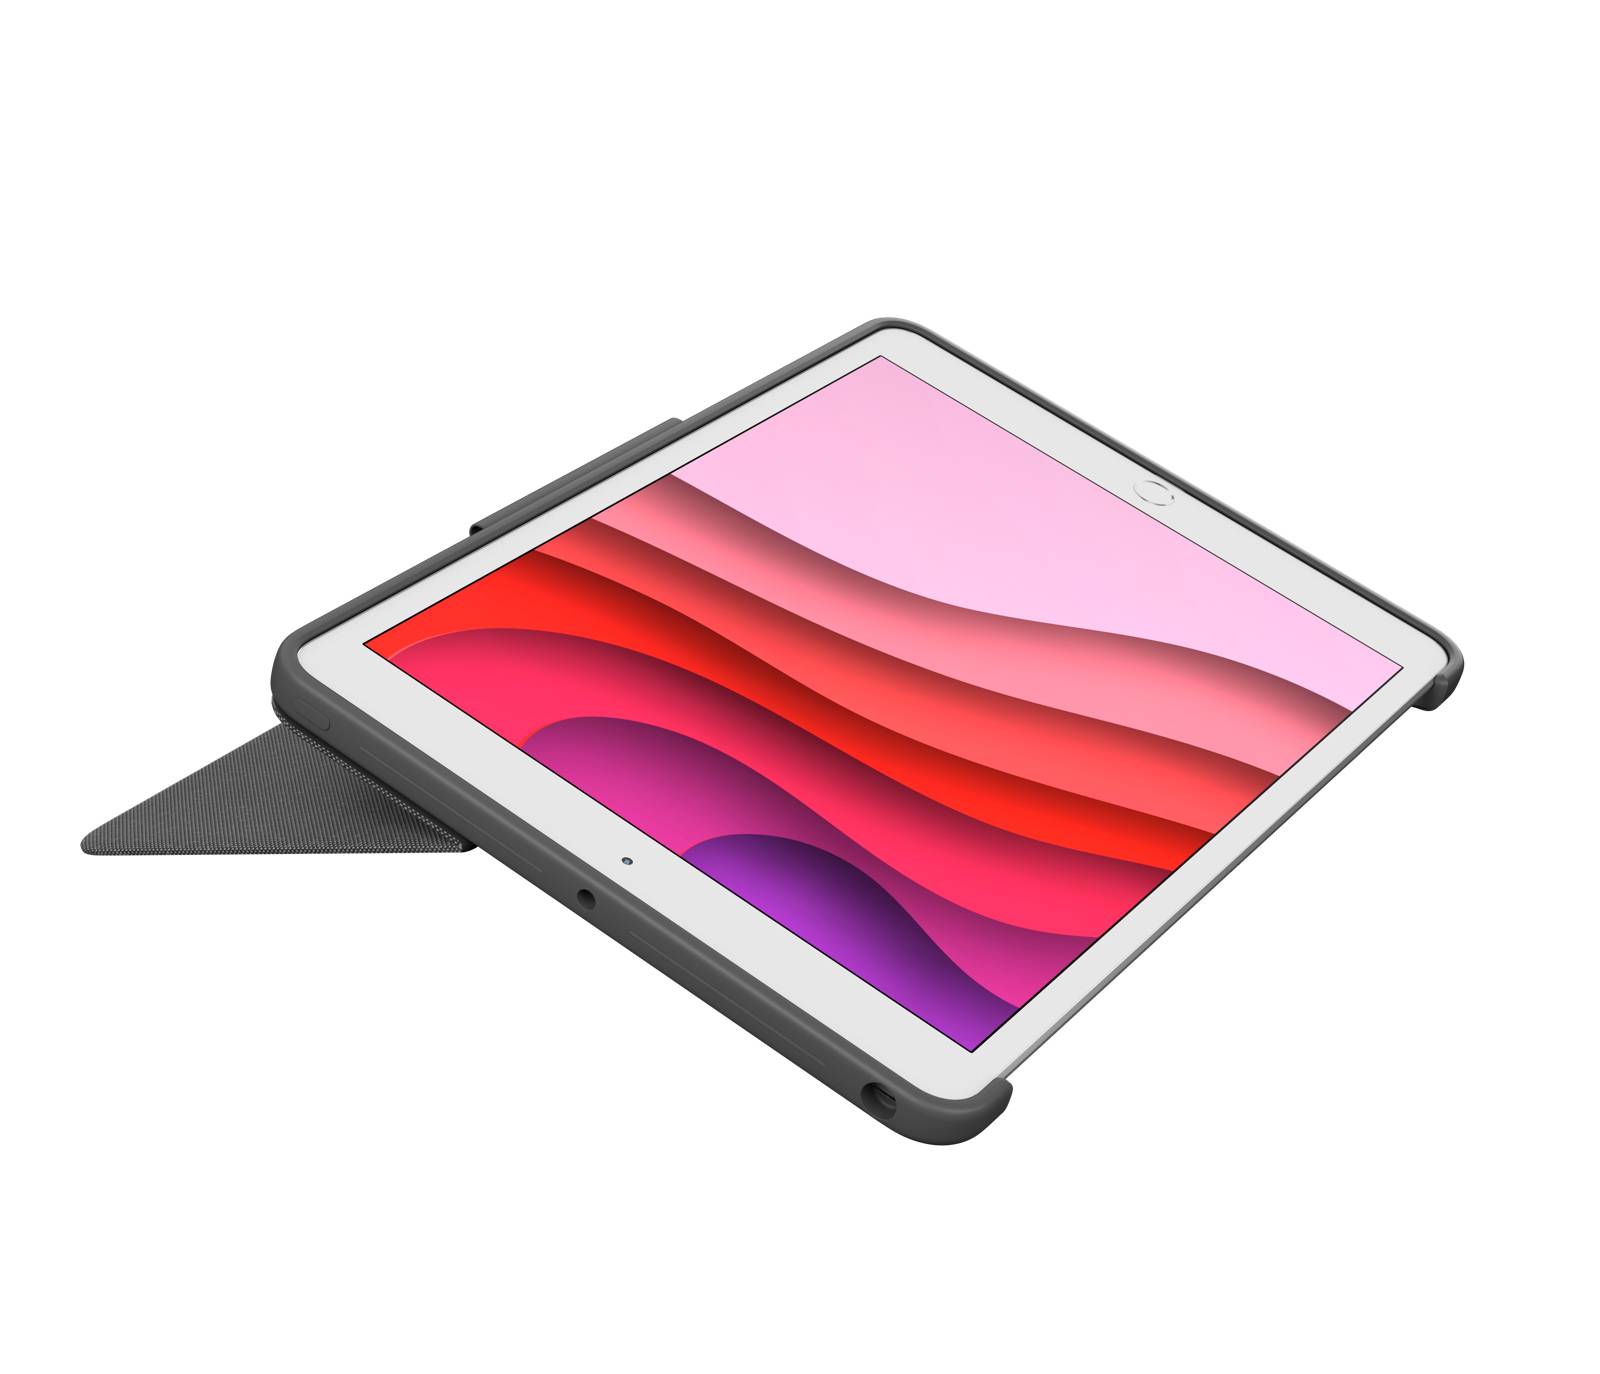 Rca Informatique - image du produit : COMBO TOUCH F/ IPAD 7TH AND 8TH GENERATION GRAPHITE FRA CENTRAL